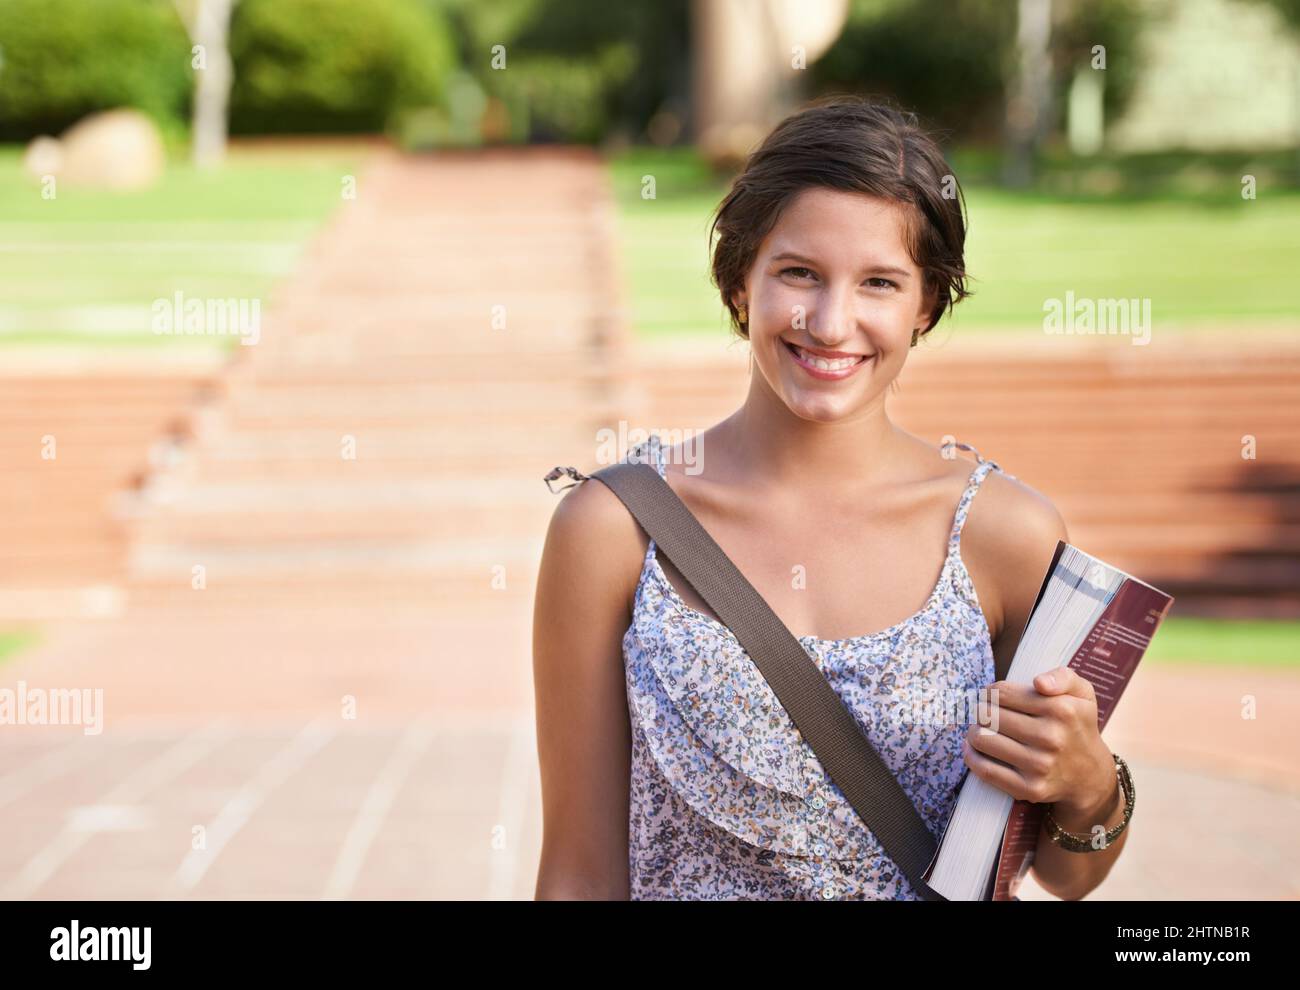 Preparing for a bright future. A beautiful young student standing on campus smiling at the camera. Stock Photo